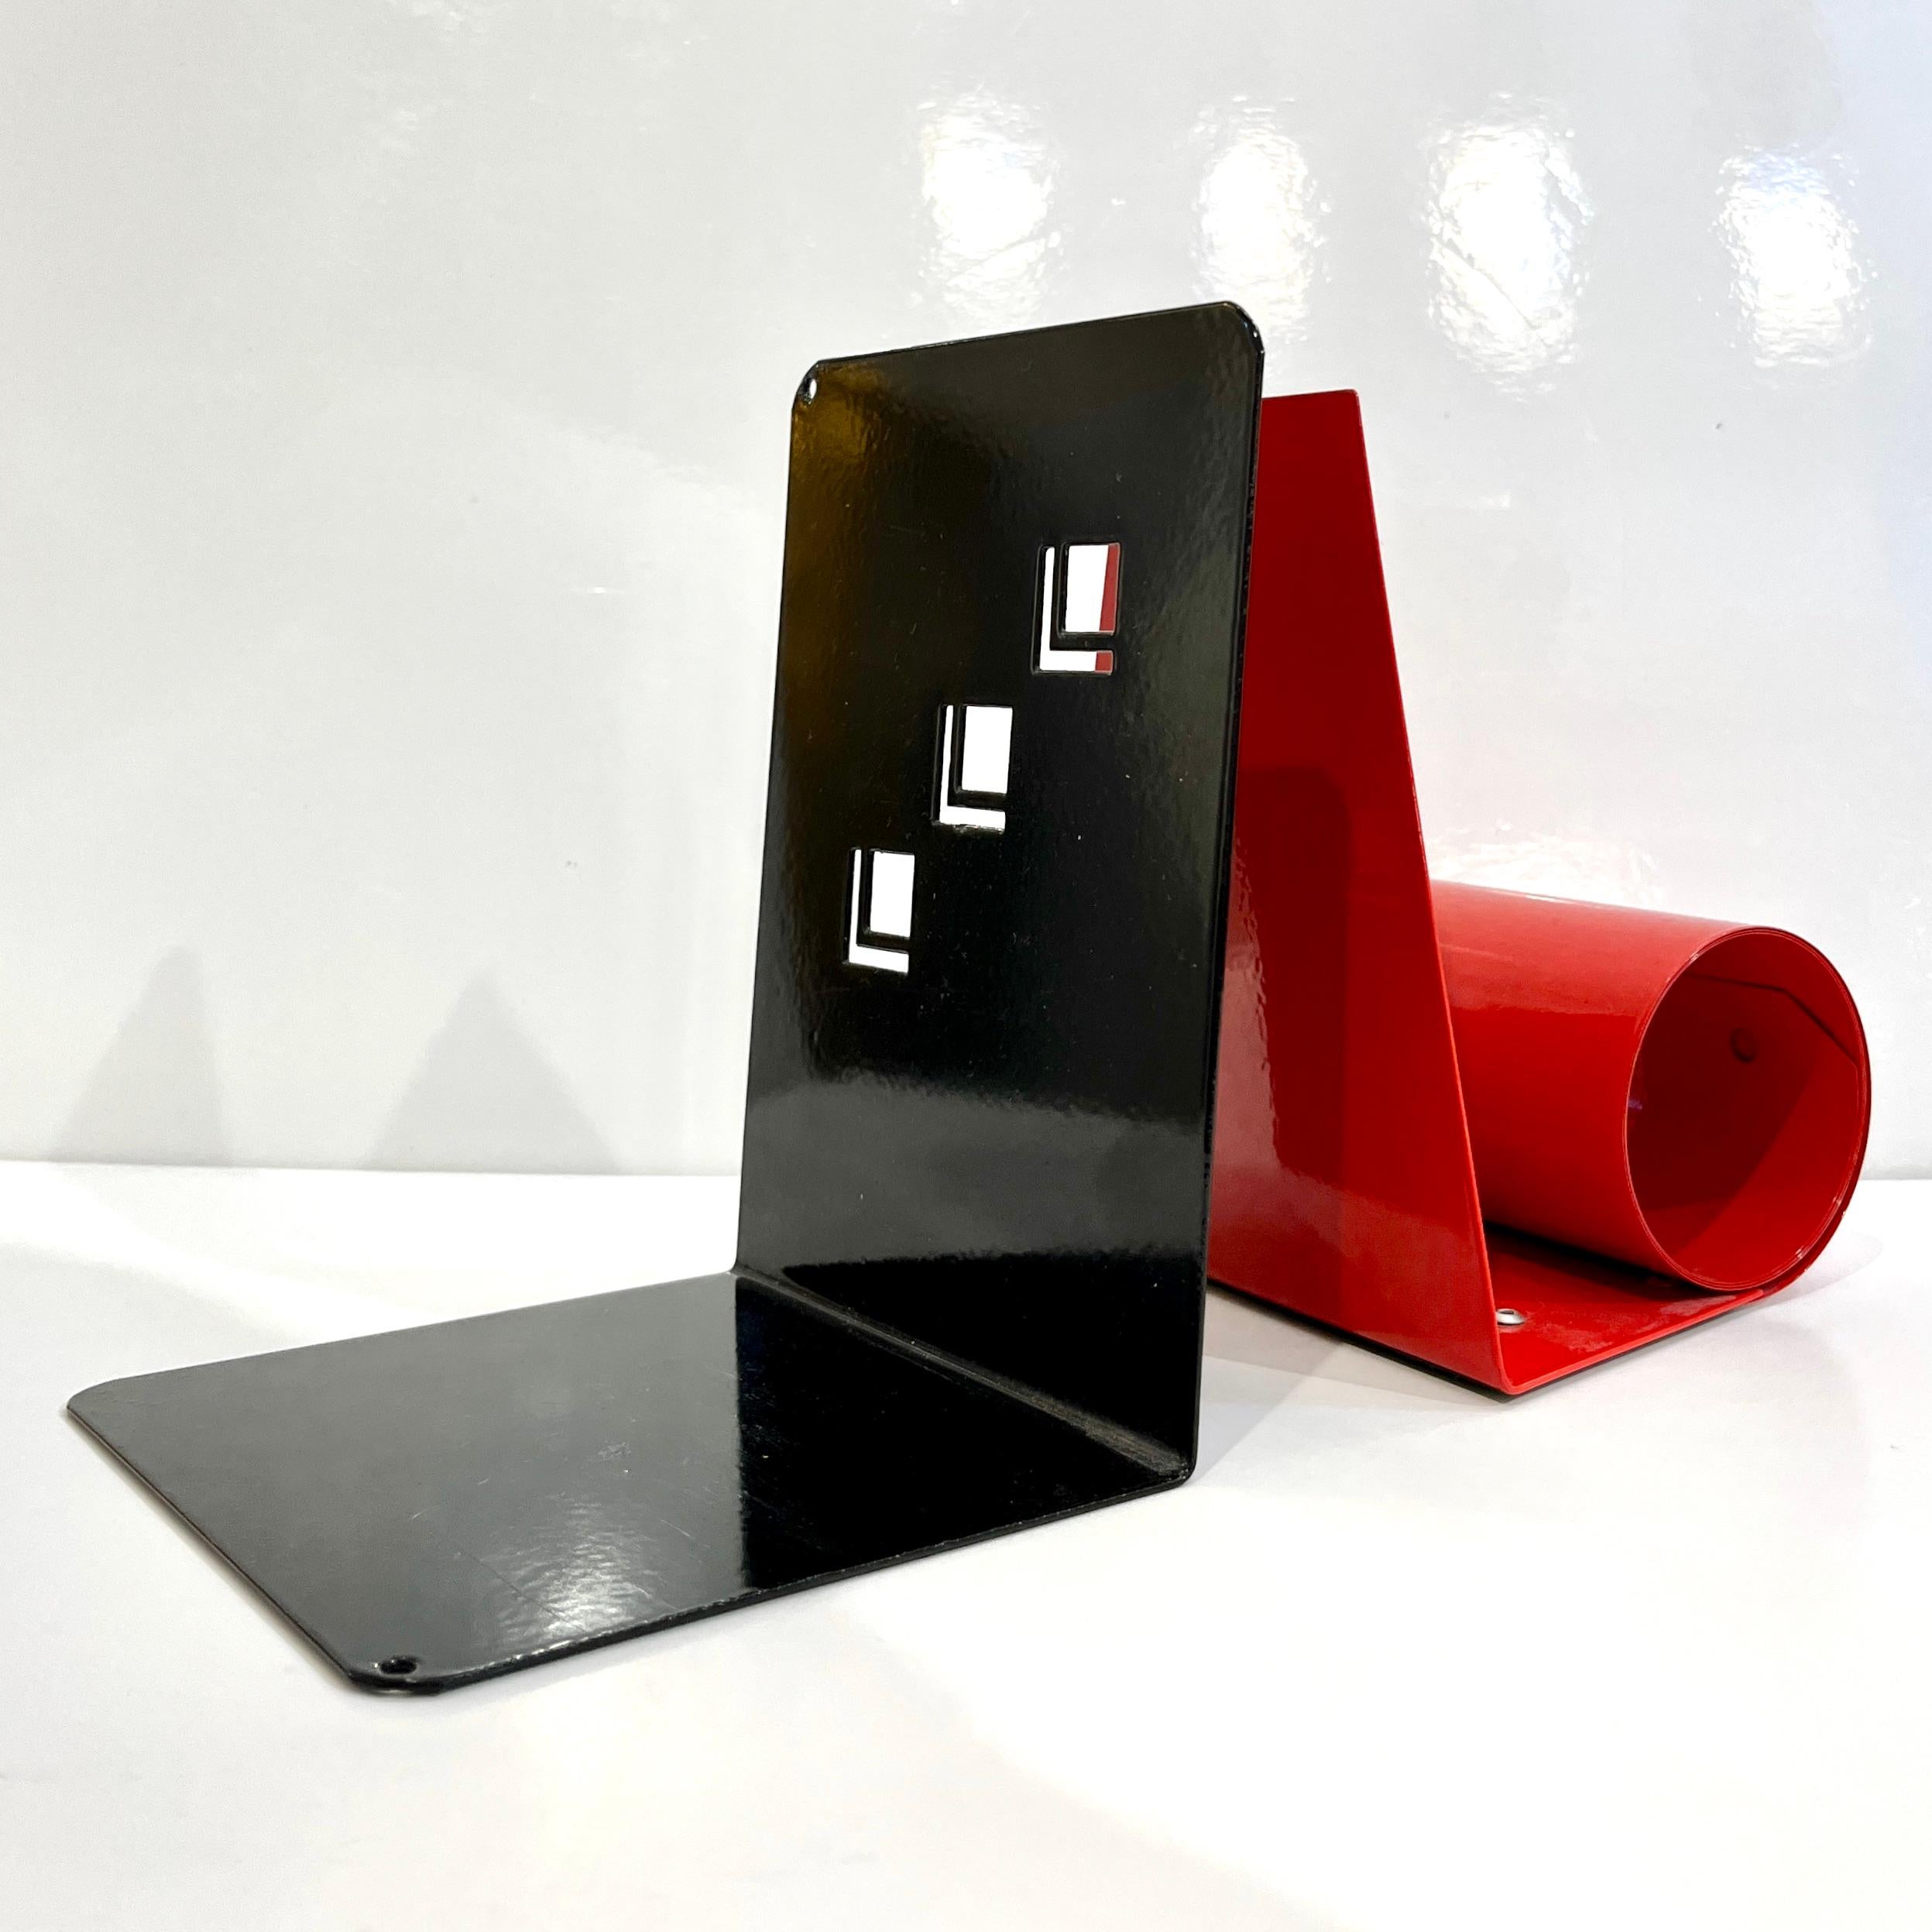 Hand-Crafted 1970s Italian Vintage Red & Black Lacquered Metal Post-Modern Geometric Bookends For Sale